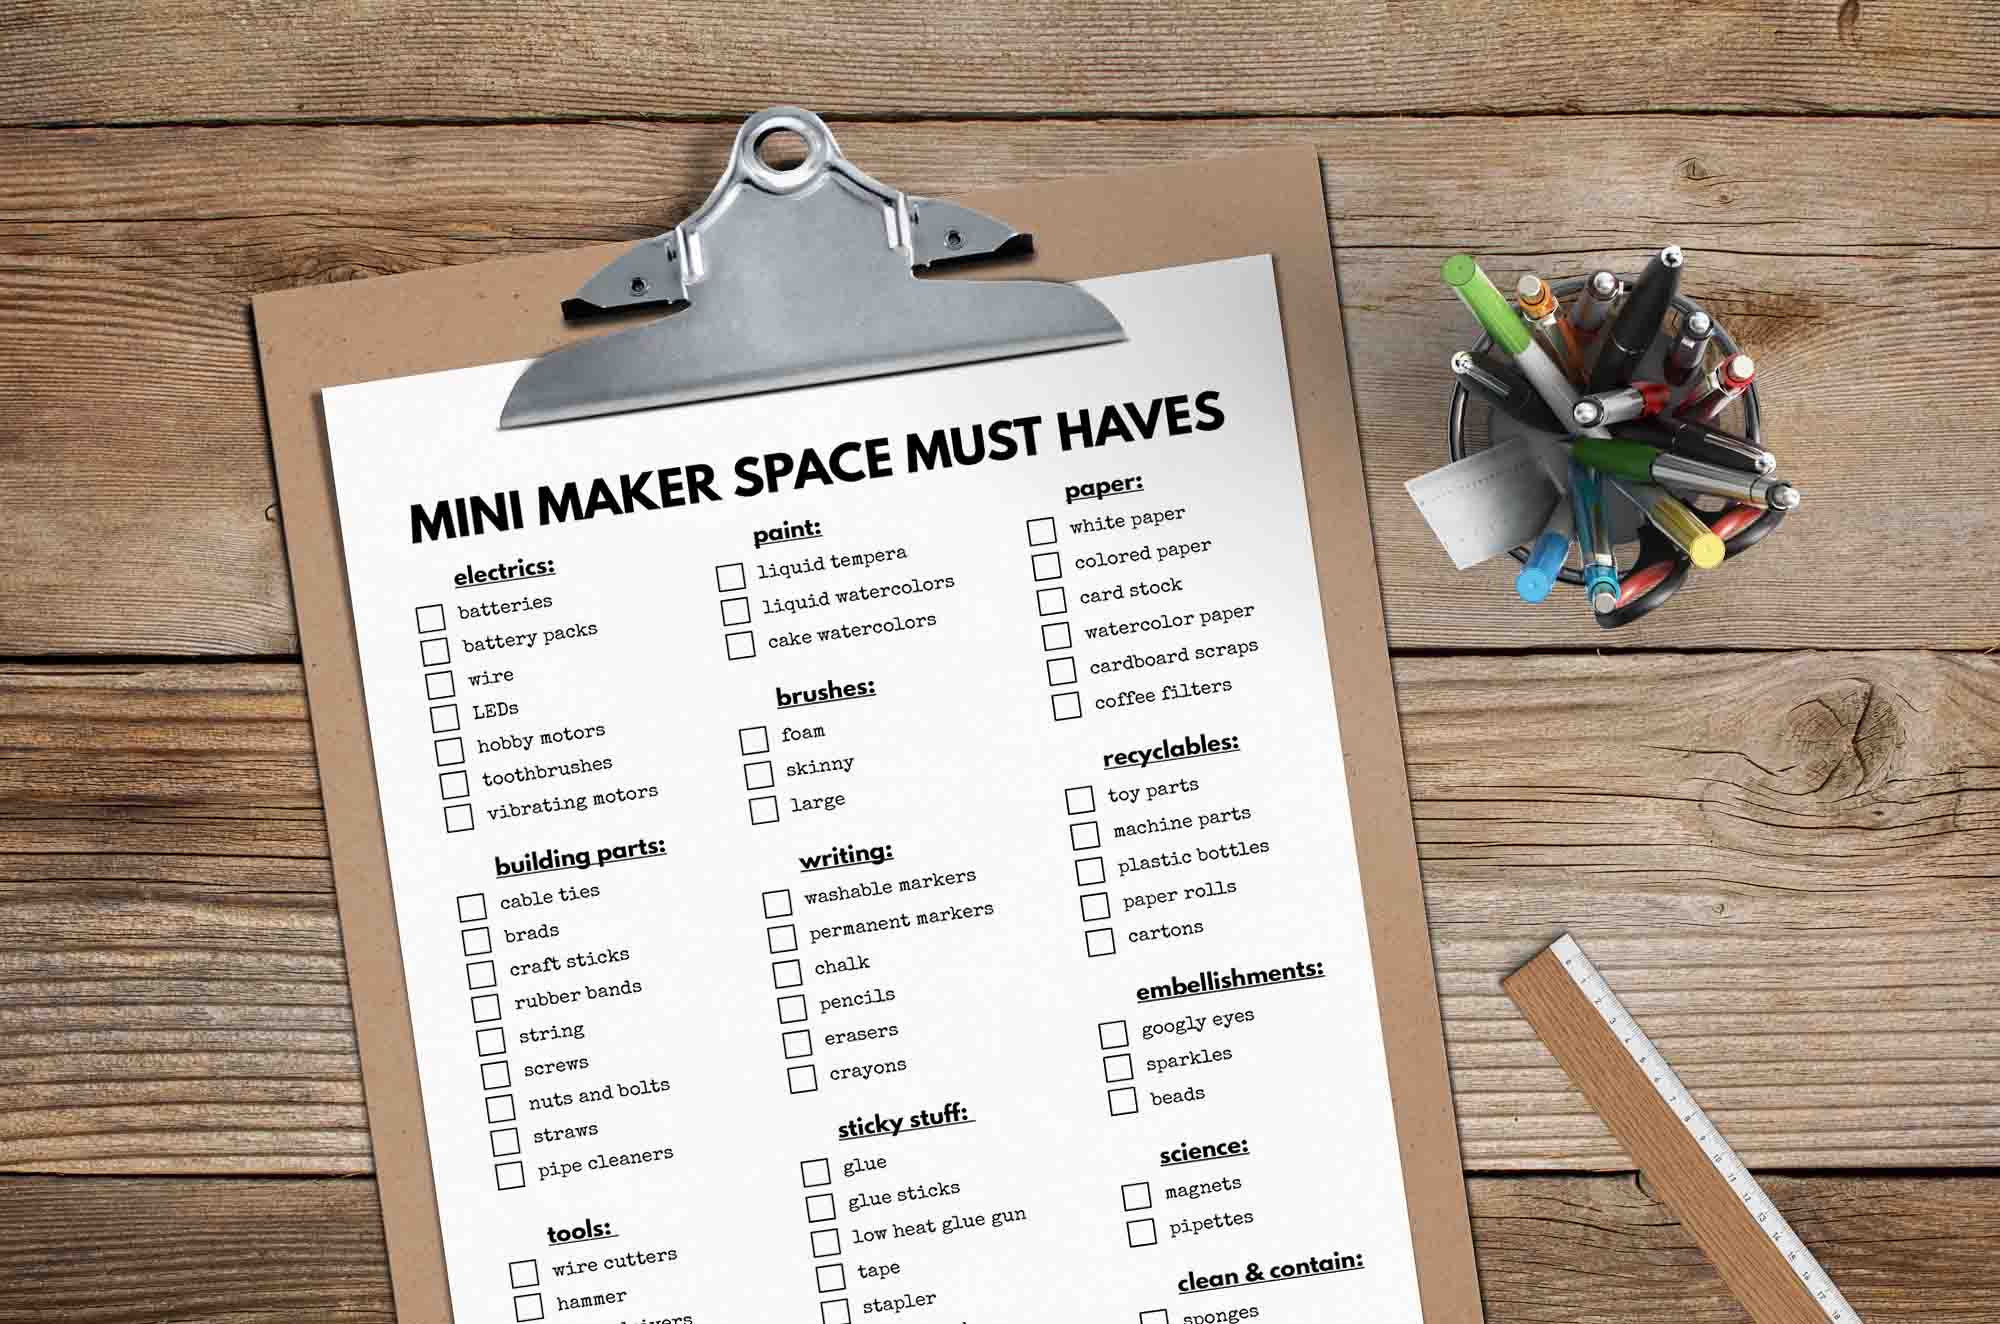 Mini Maker Space Must Haves Checklist with Supplies no logo